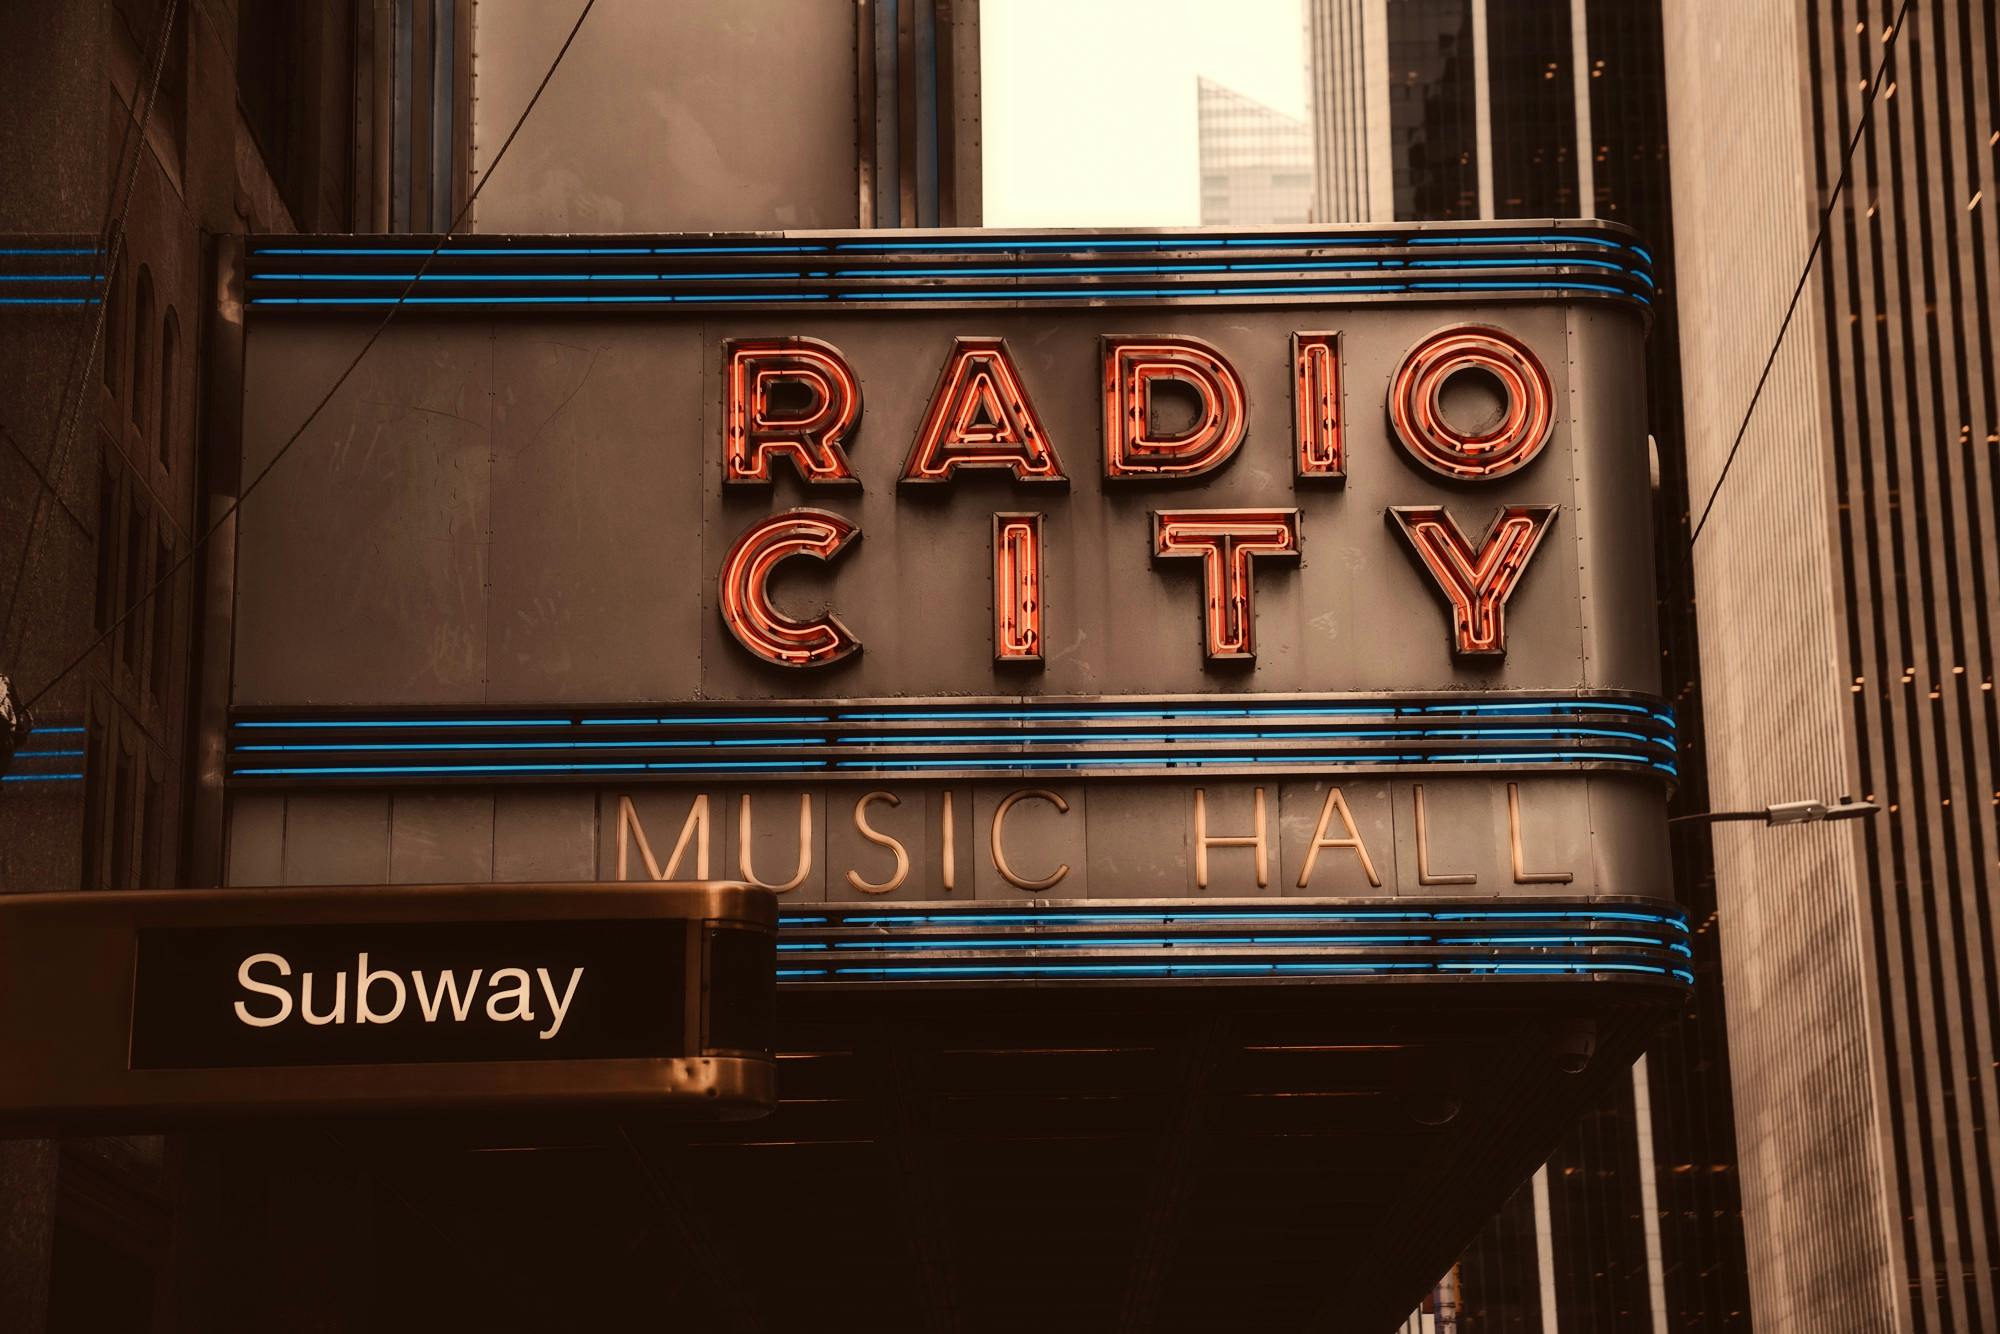 a radio city music hall sign on the side of a building, an album cover, flickr, graffiti, vintage color photo, sepia photography, 2 0 2 2 photo, fan favorite